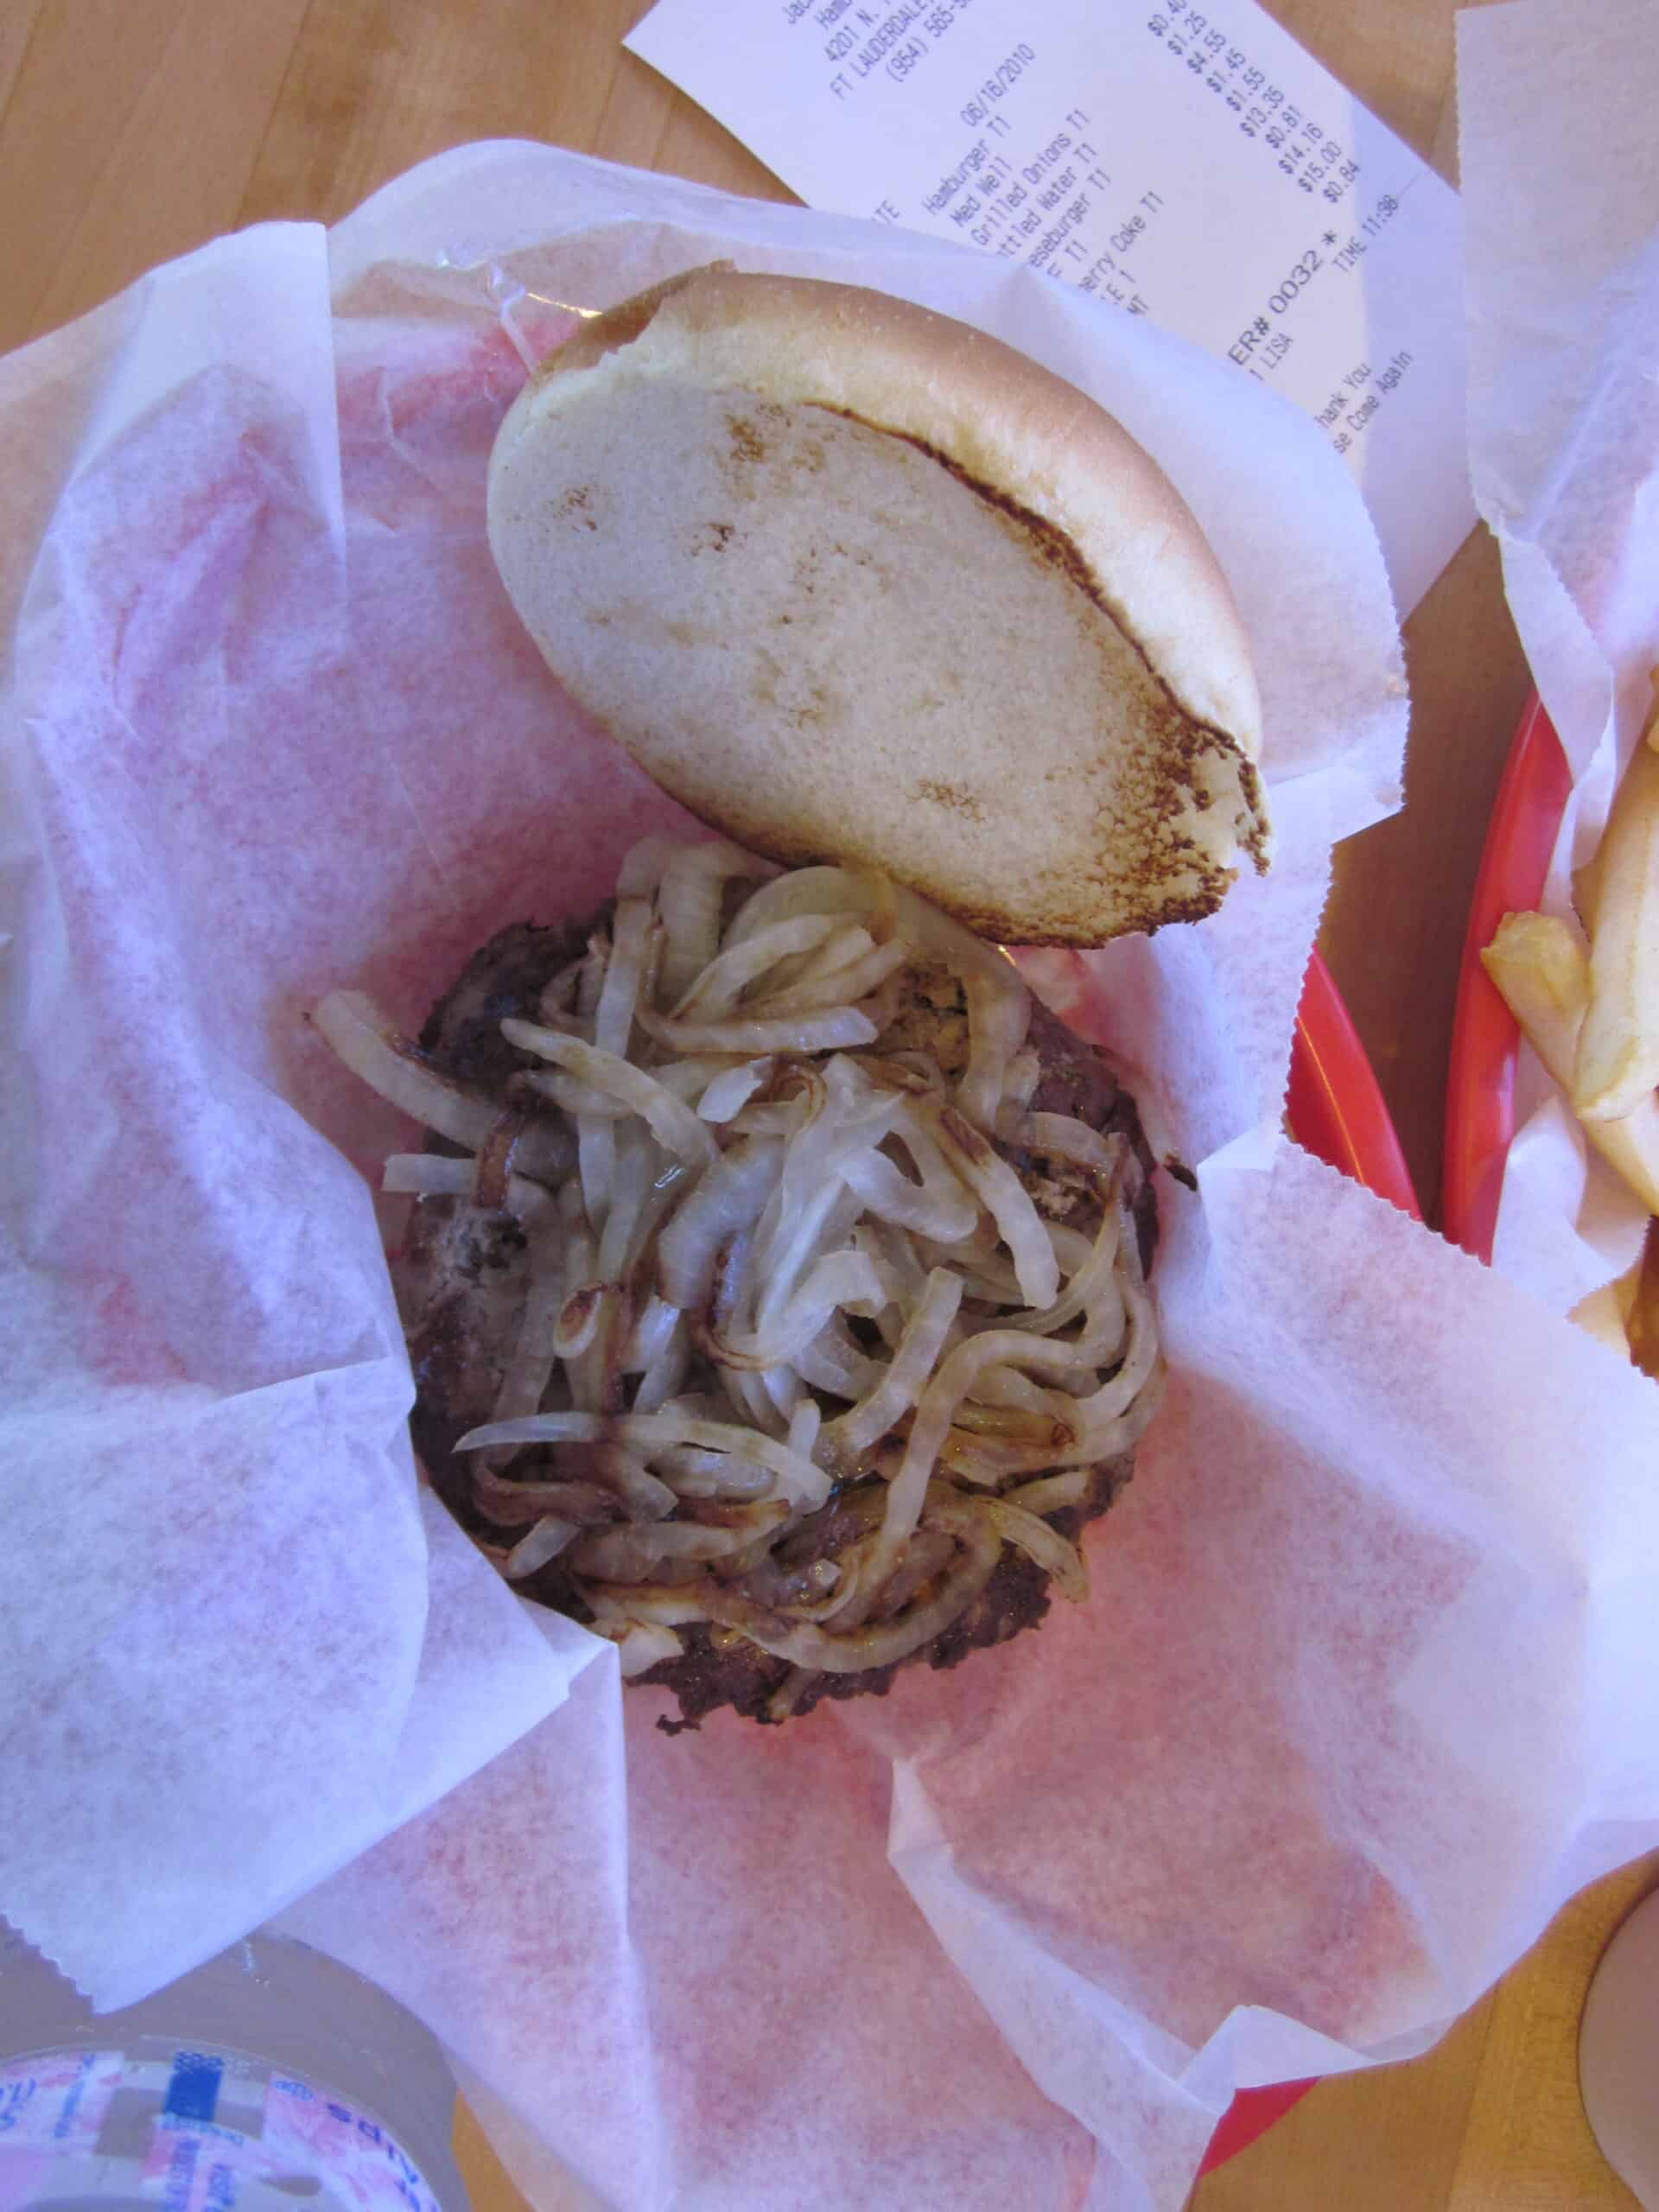 Hamburger with grilled onions, Jack's restaurant, Fort Lauderdale, Florida